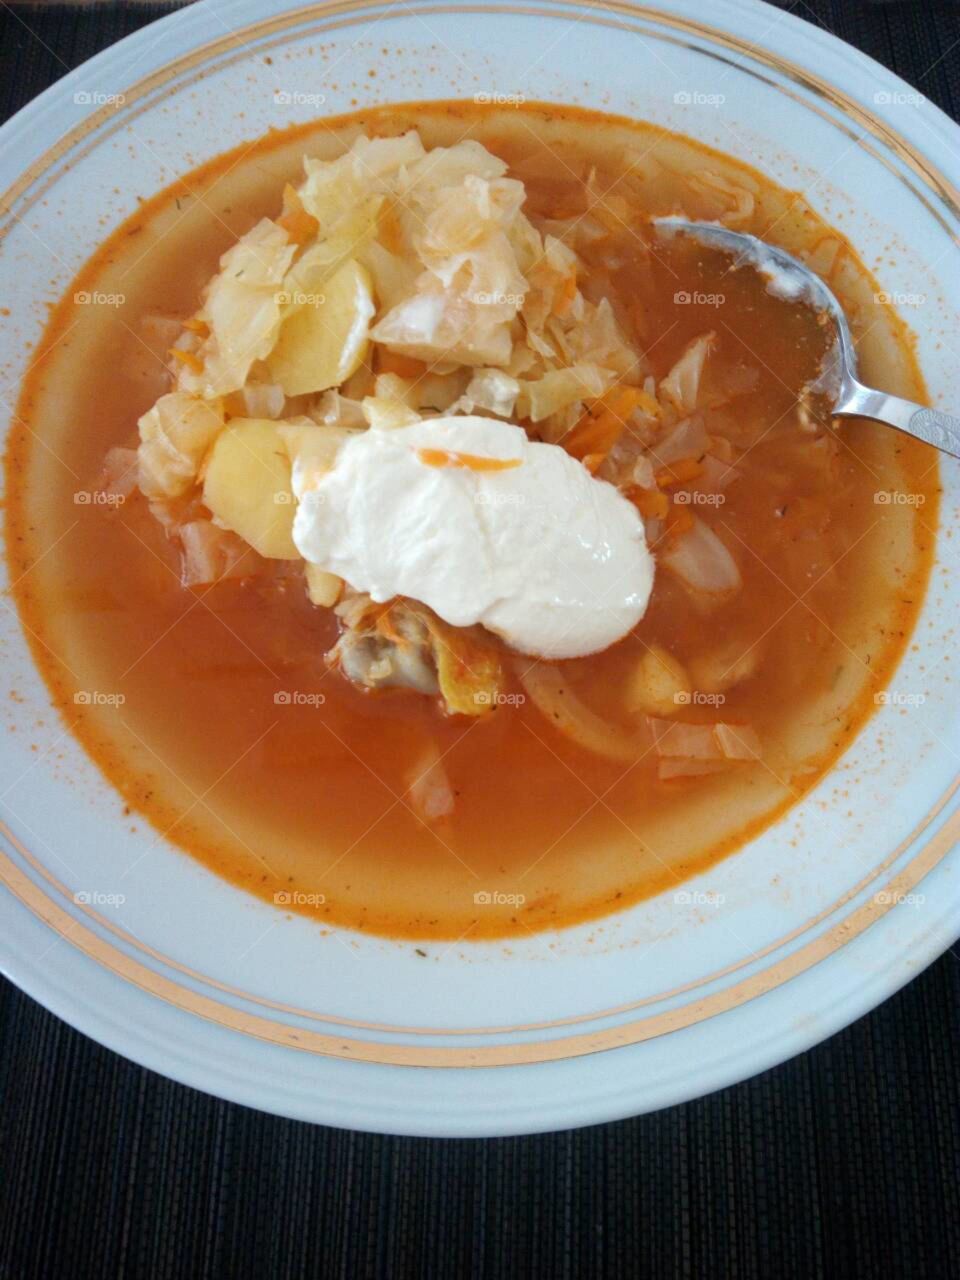 Belarussian soup one of my favourites